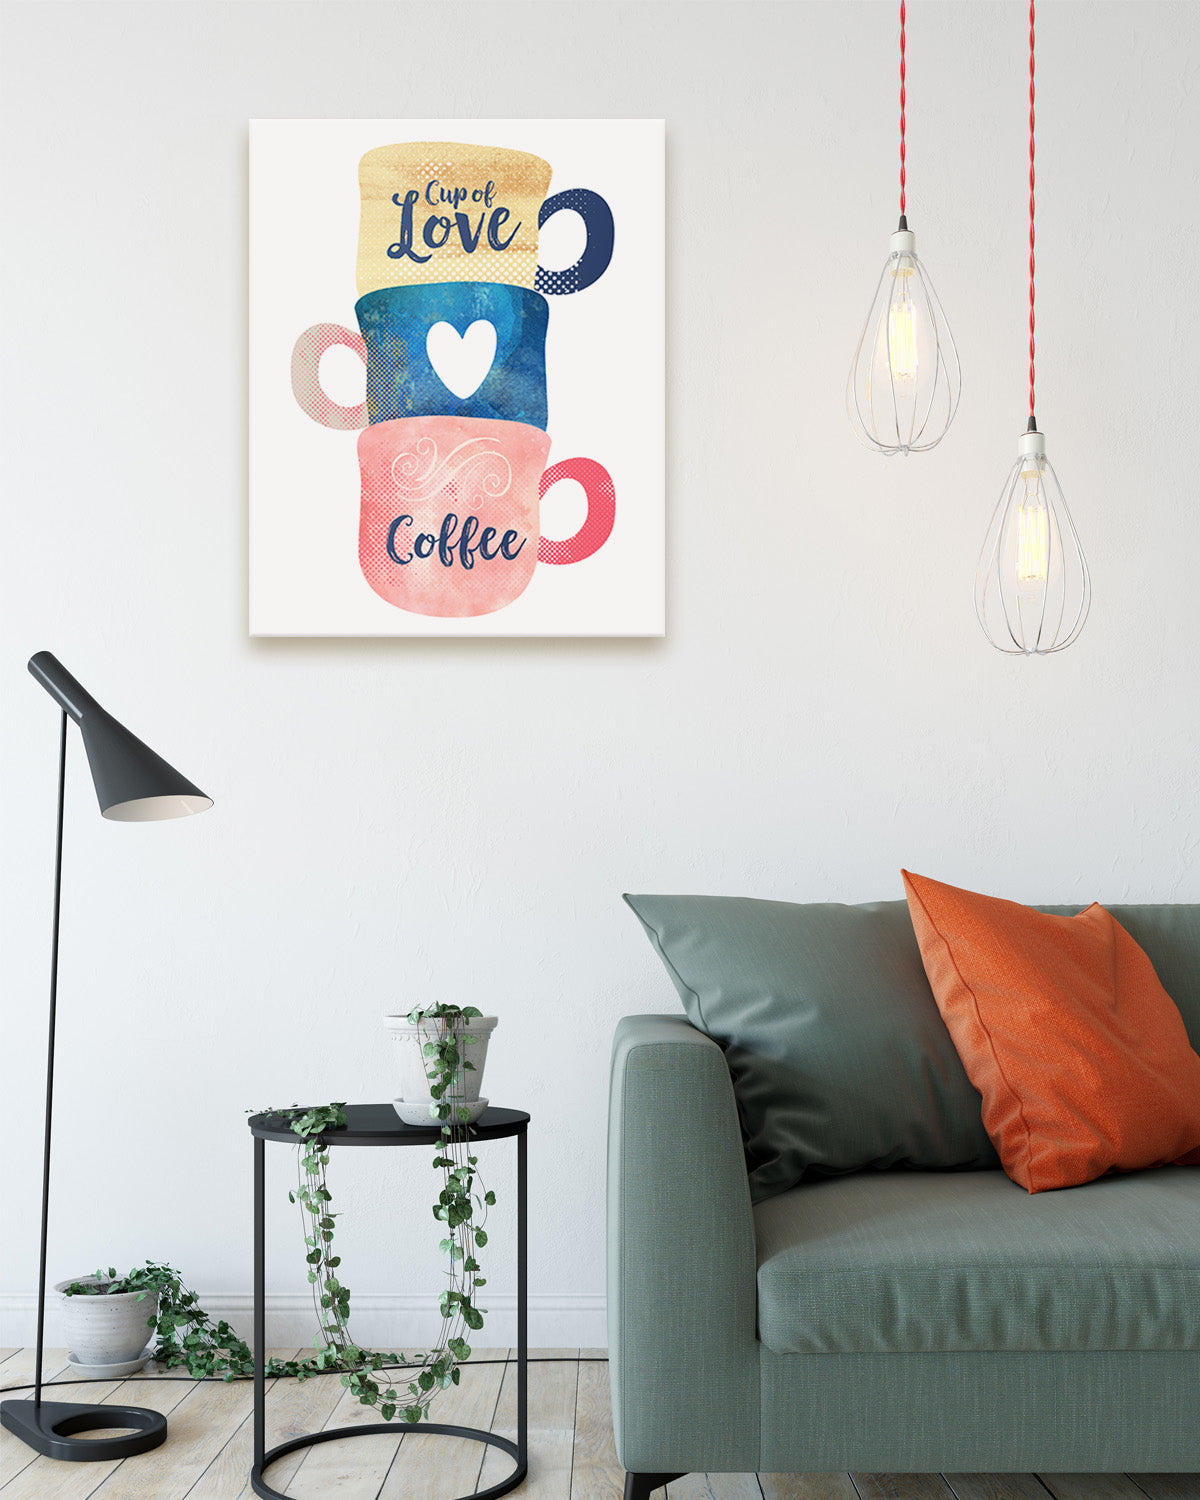 Coffee kitchen decor - Coffee bar decor - Coffee signs kitchen decor - watercolor wall art coffee decoration pictures - Great gift for coffee lovers